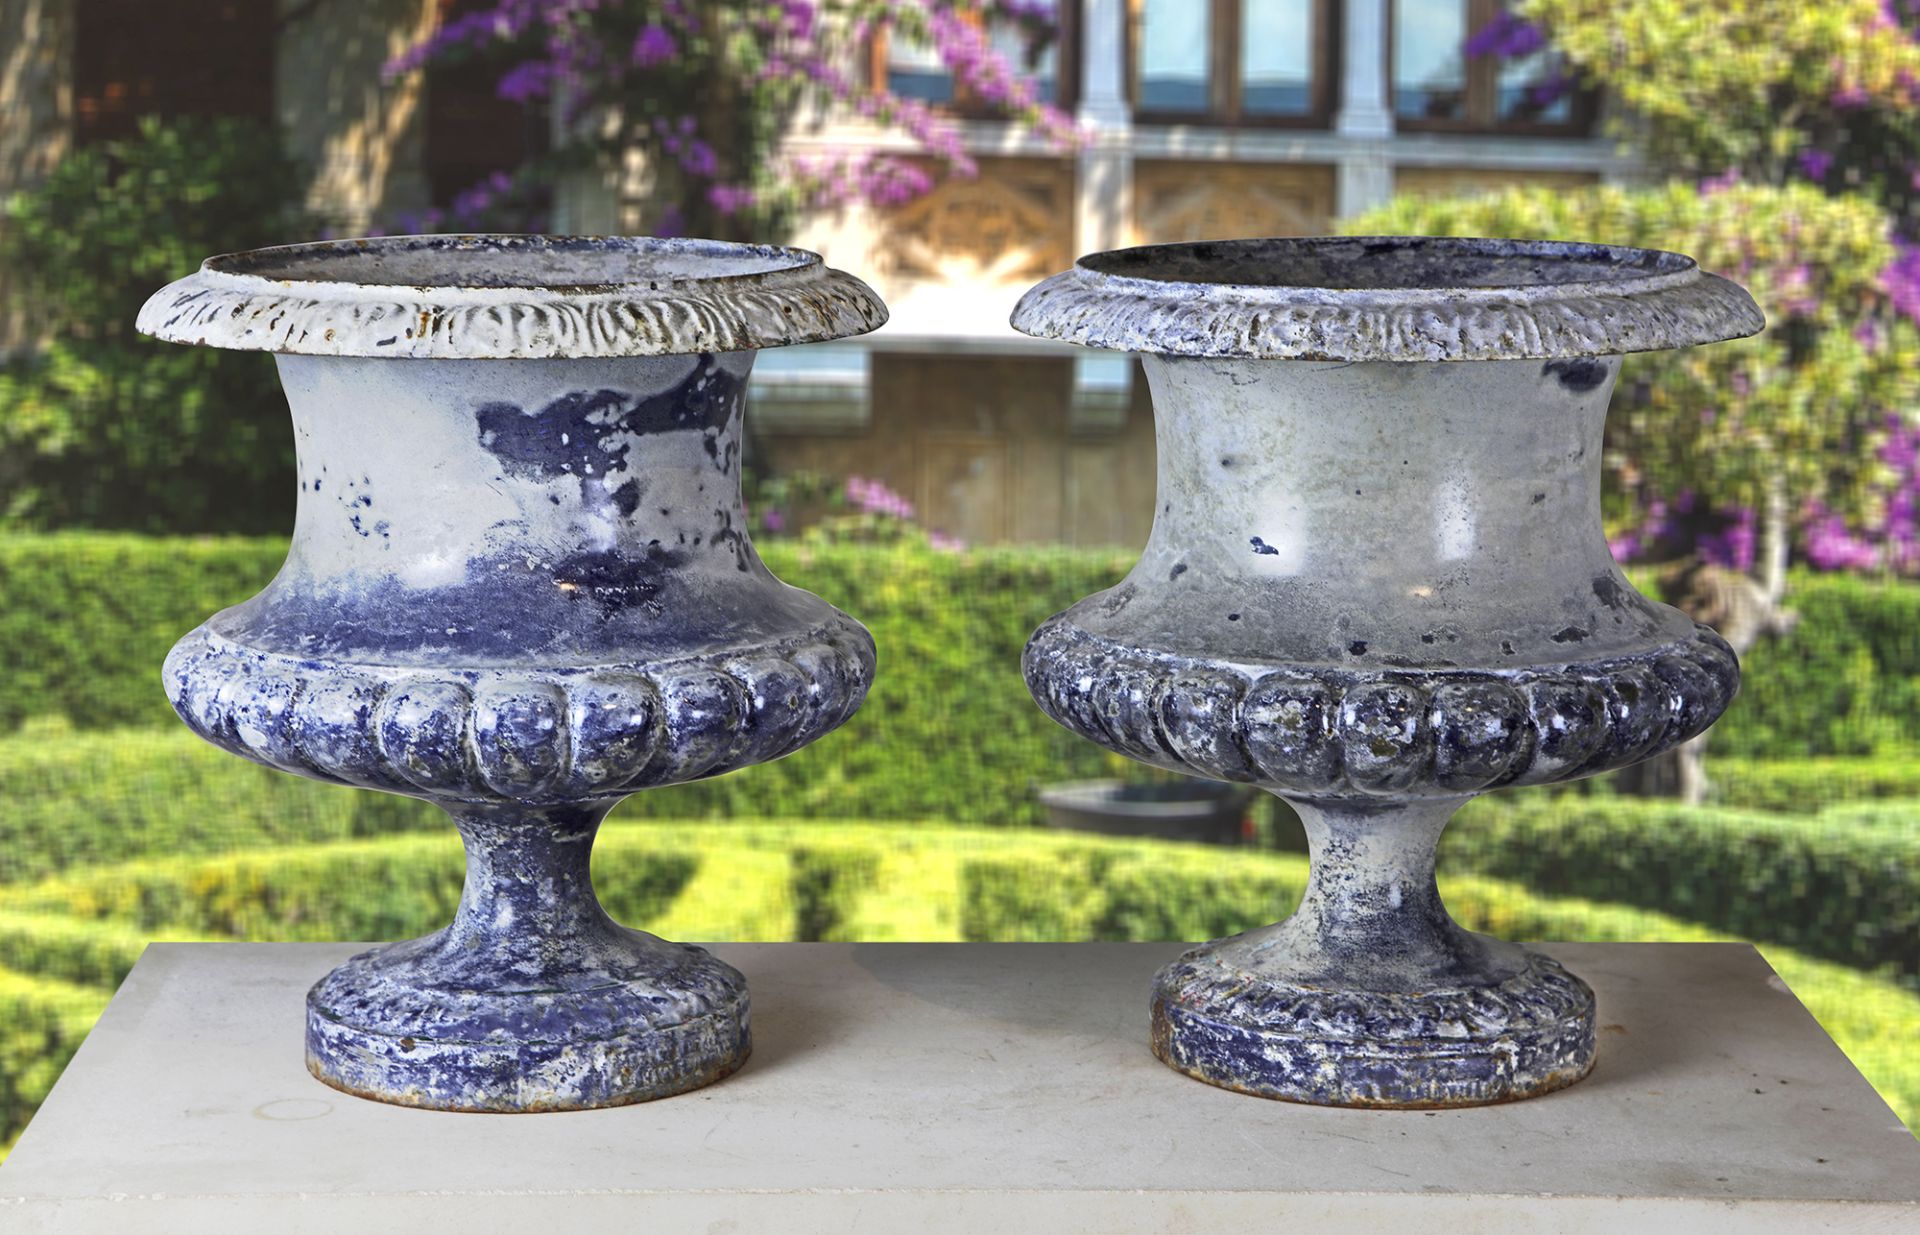 A PAIR OF FRENCH BLUE ENAMELLED CAST IRON PLANTERS LATE 19TH CENTURY BY FONDERIE CORNEAU ALFRED, CHA